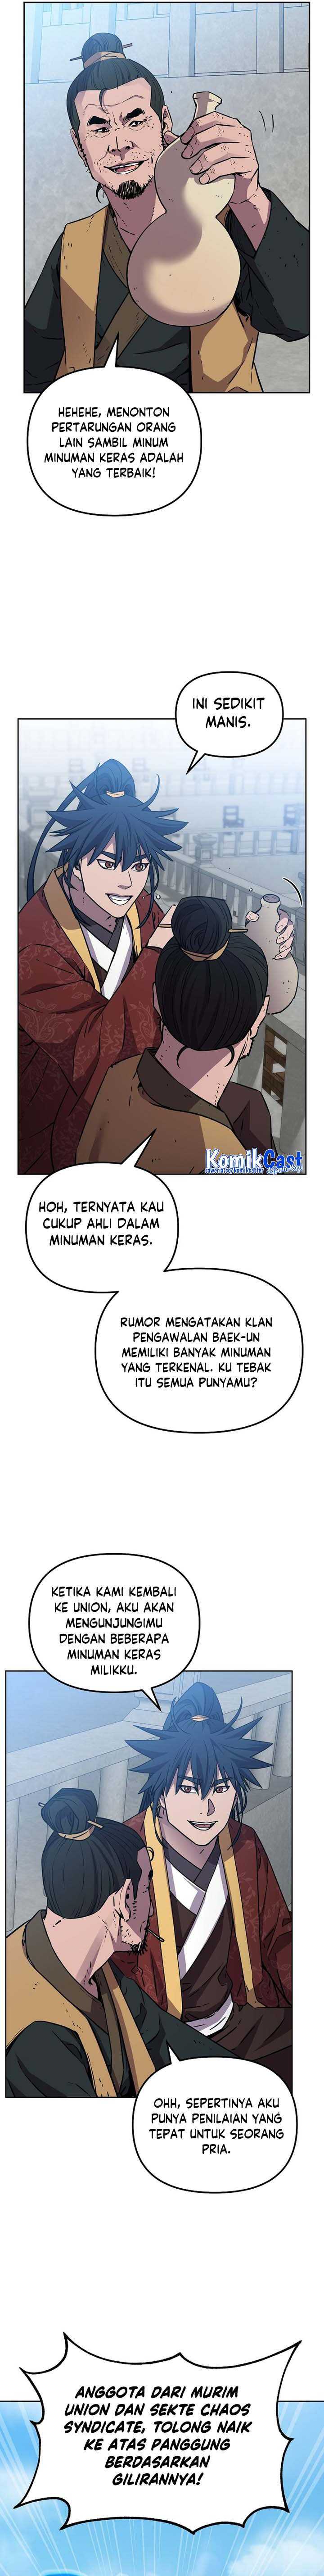 Reincarnation of the Murim Clan’s Former Ranker Chapter 122